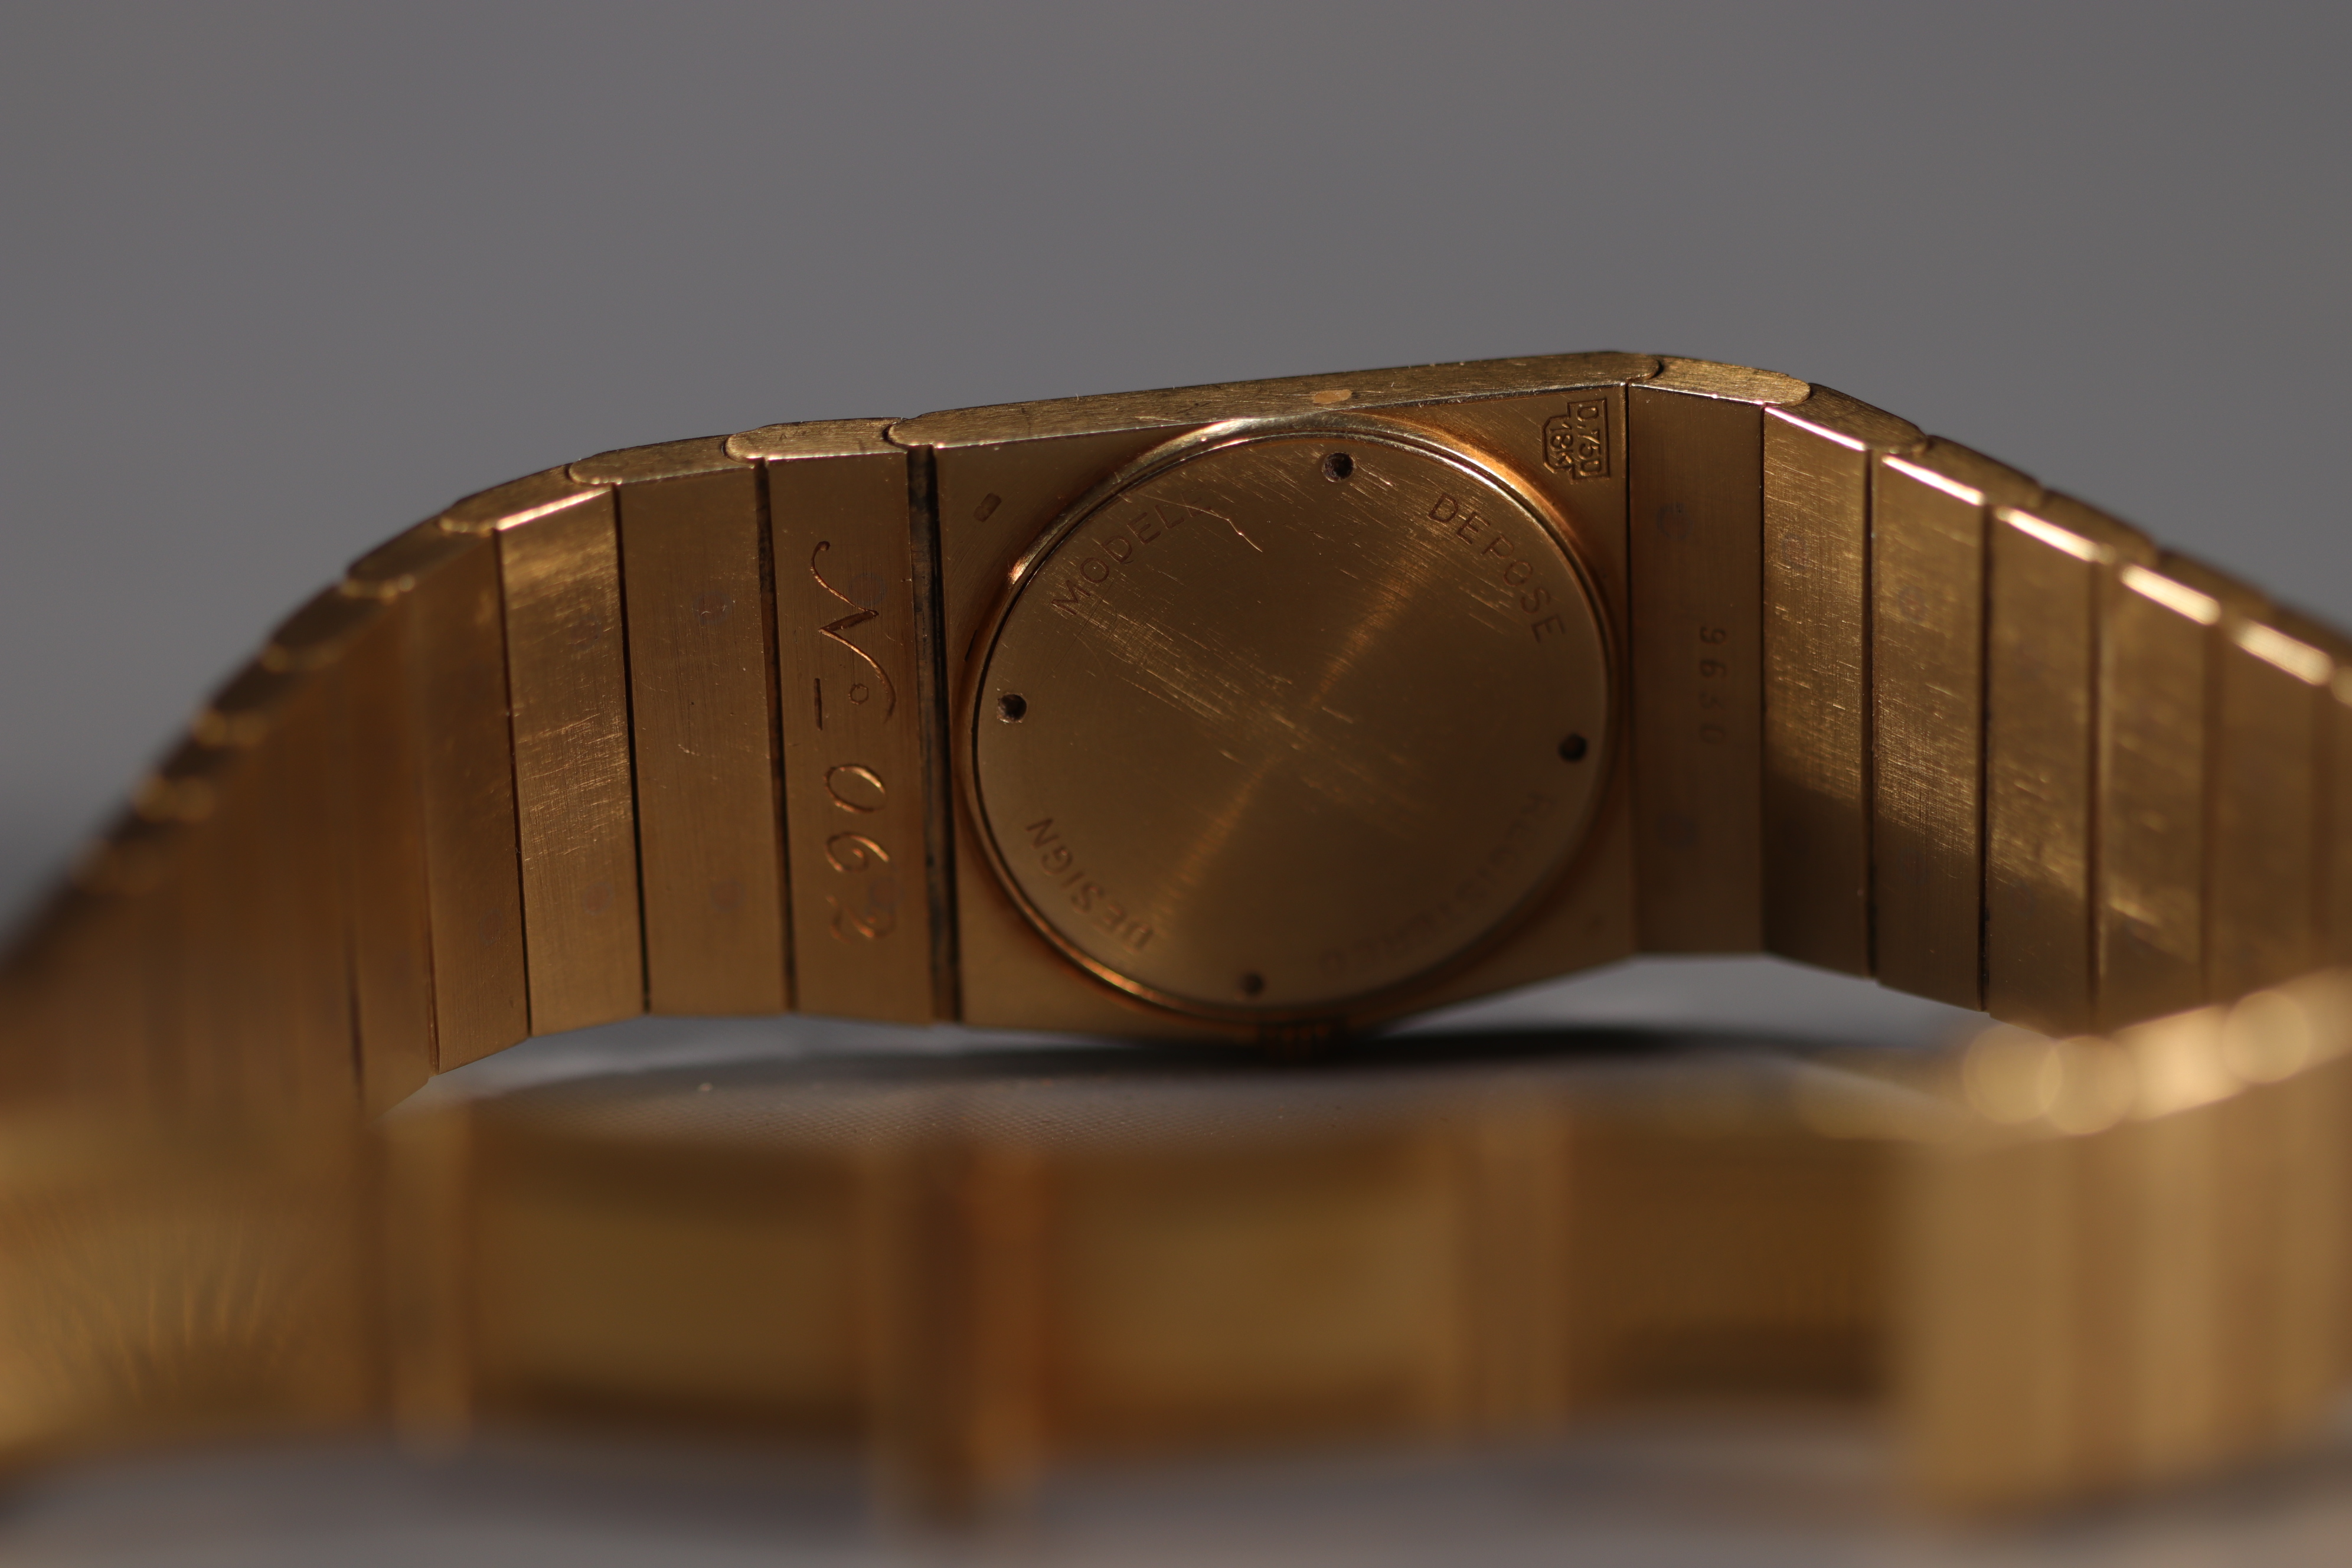 Rolex "King Midas" - Mechanical watch, case and bracelet in 18K yellow gold, ref 9630, calibre 650.  - Image 6 of 7